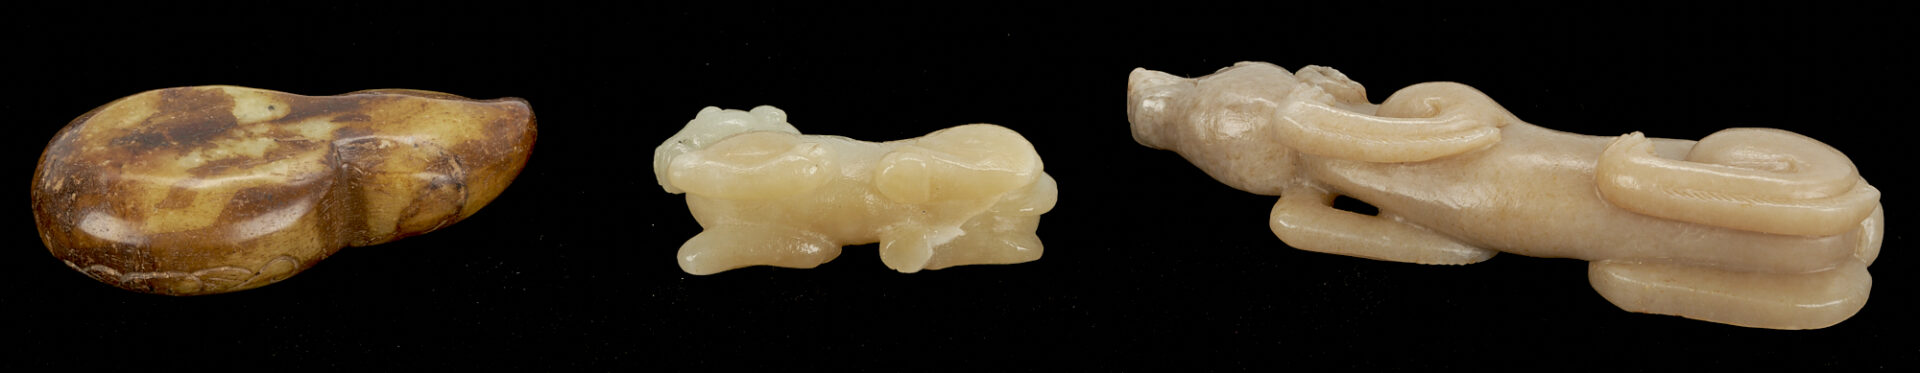 Lot 4: 3 Chinese Jade Figural Carvings, incl. Dog, Camel & Gourd